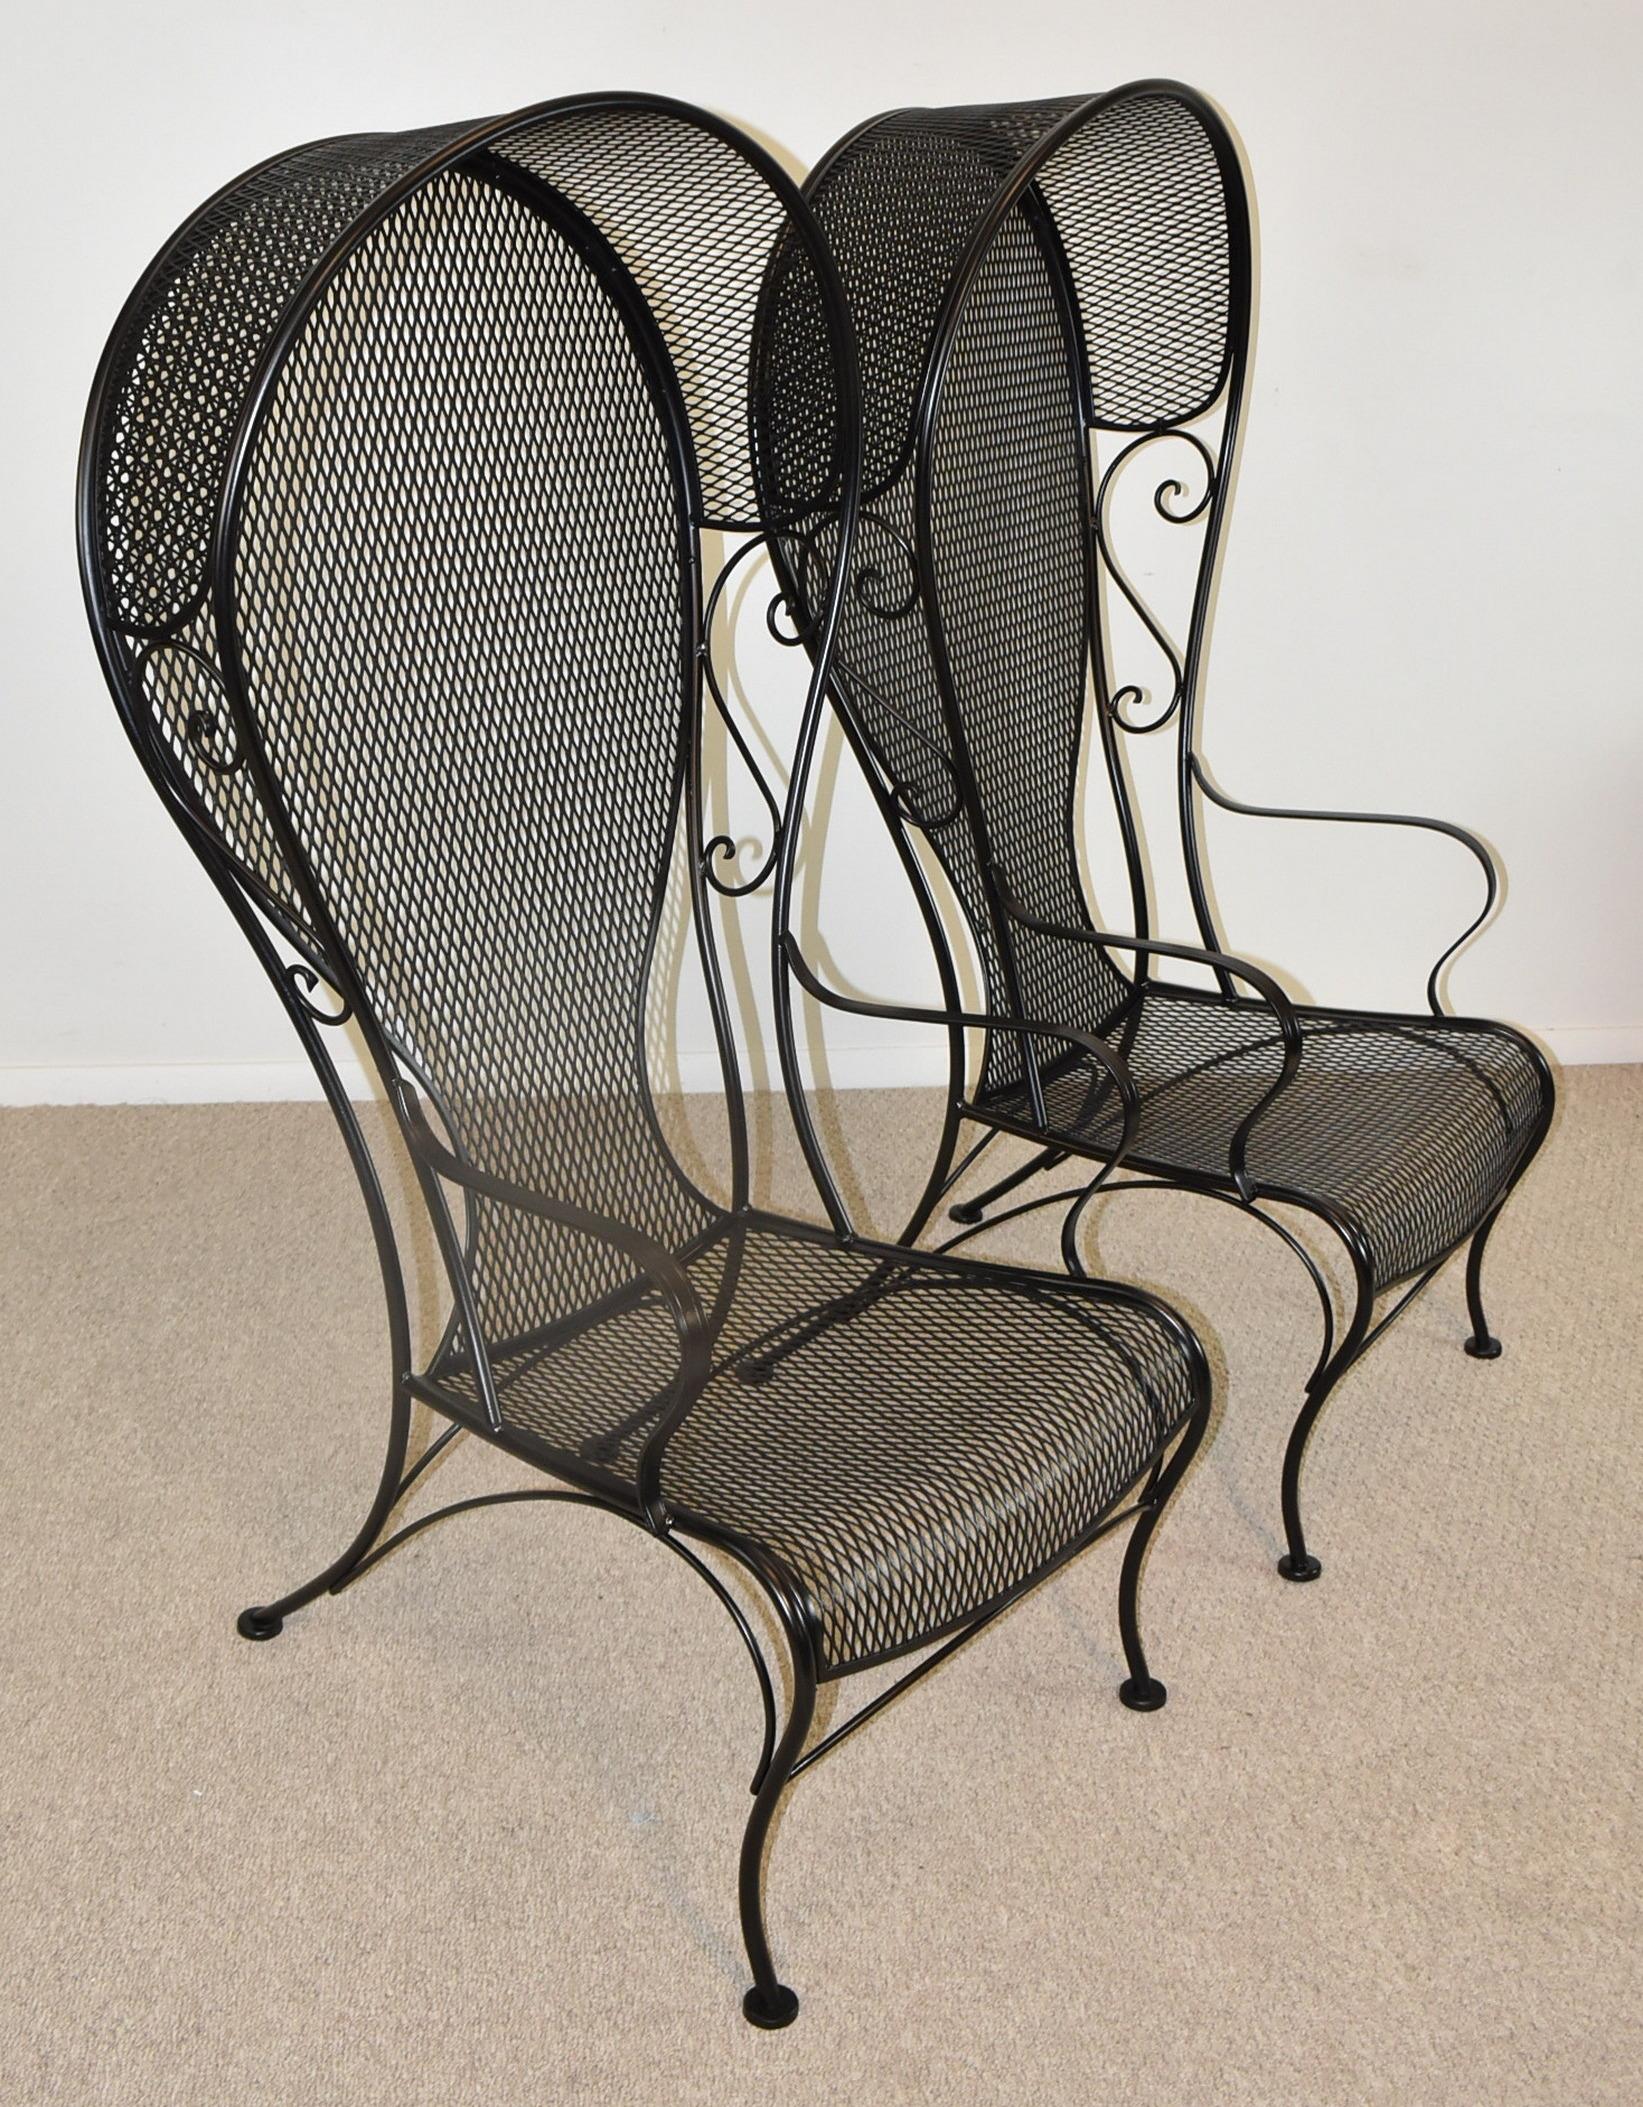 Pair of Russell woodard high back princess canopy lounge chairs. Circa 1950-1959. Wrought iron high back canopy patio lounge chairs with corseted backs, also know as the Princess chair. Finished in black low Lustre paint and steel mesh. Indoor or